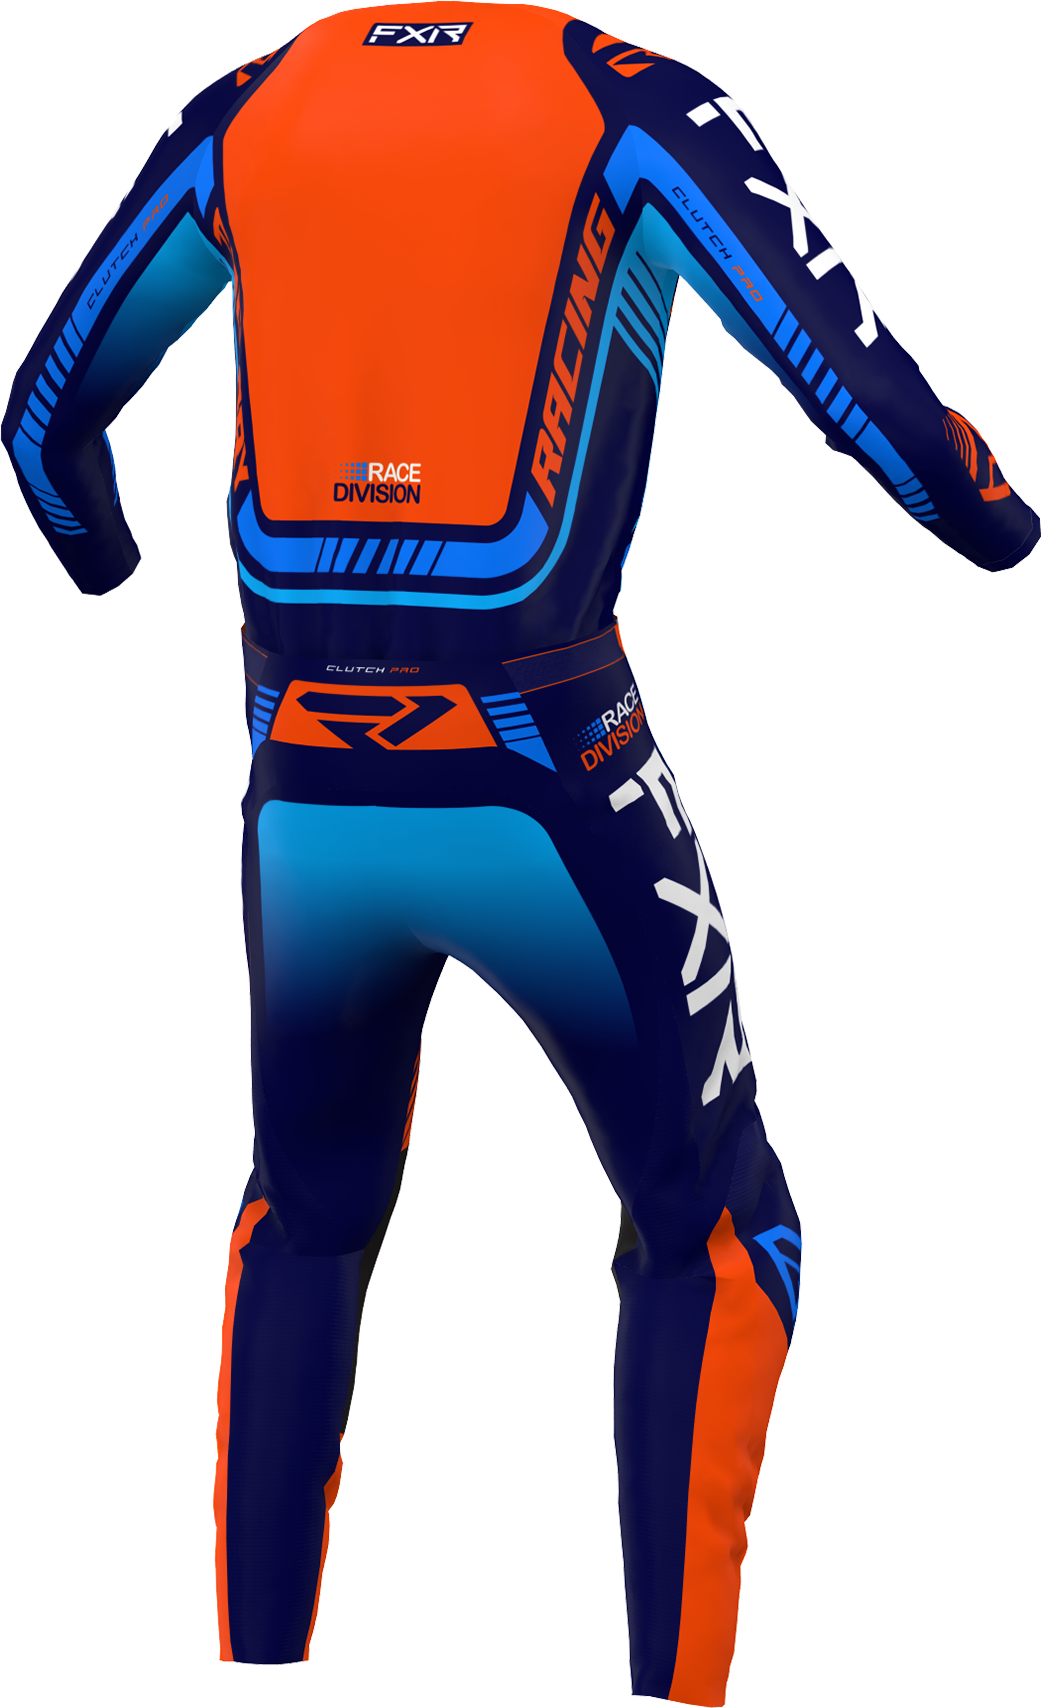 A 3D image of FXR's Clutch Pro MX Jersey and Pant in Orange/Navy colorway